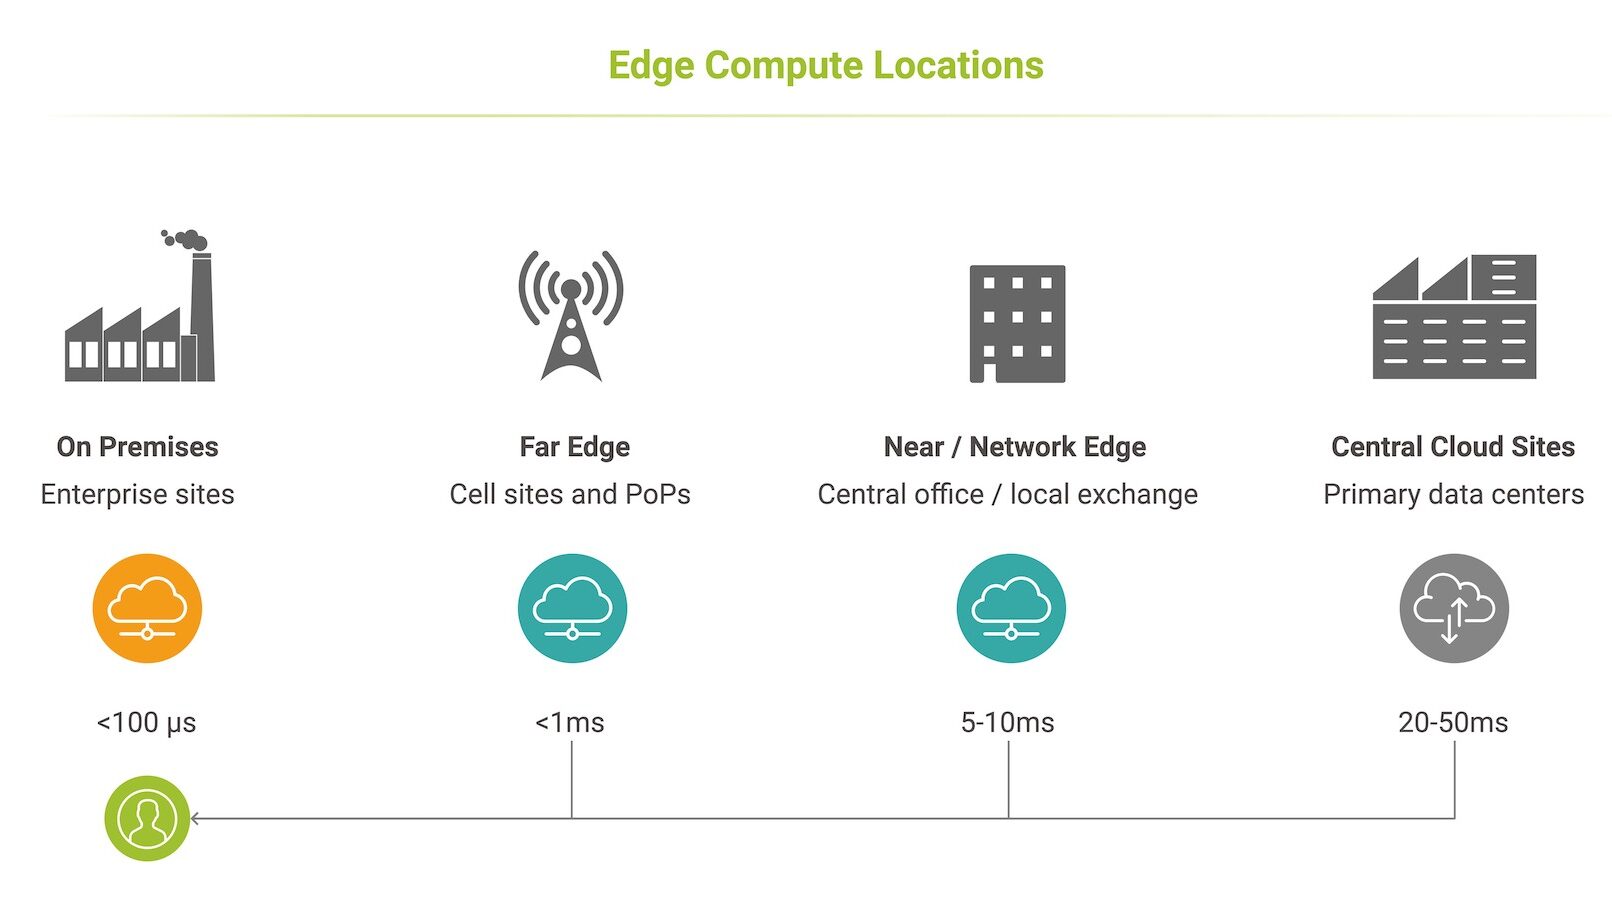 Common Edge Locations and Latency